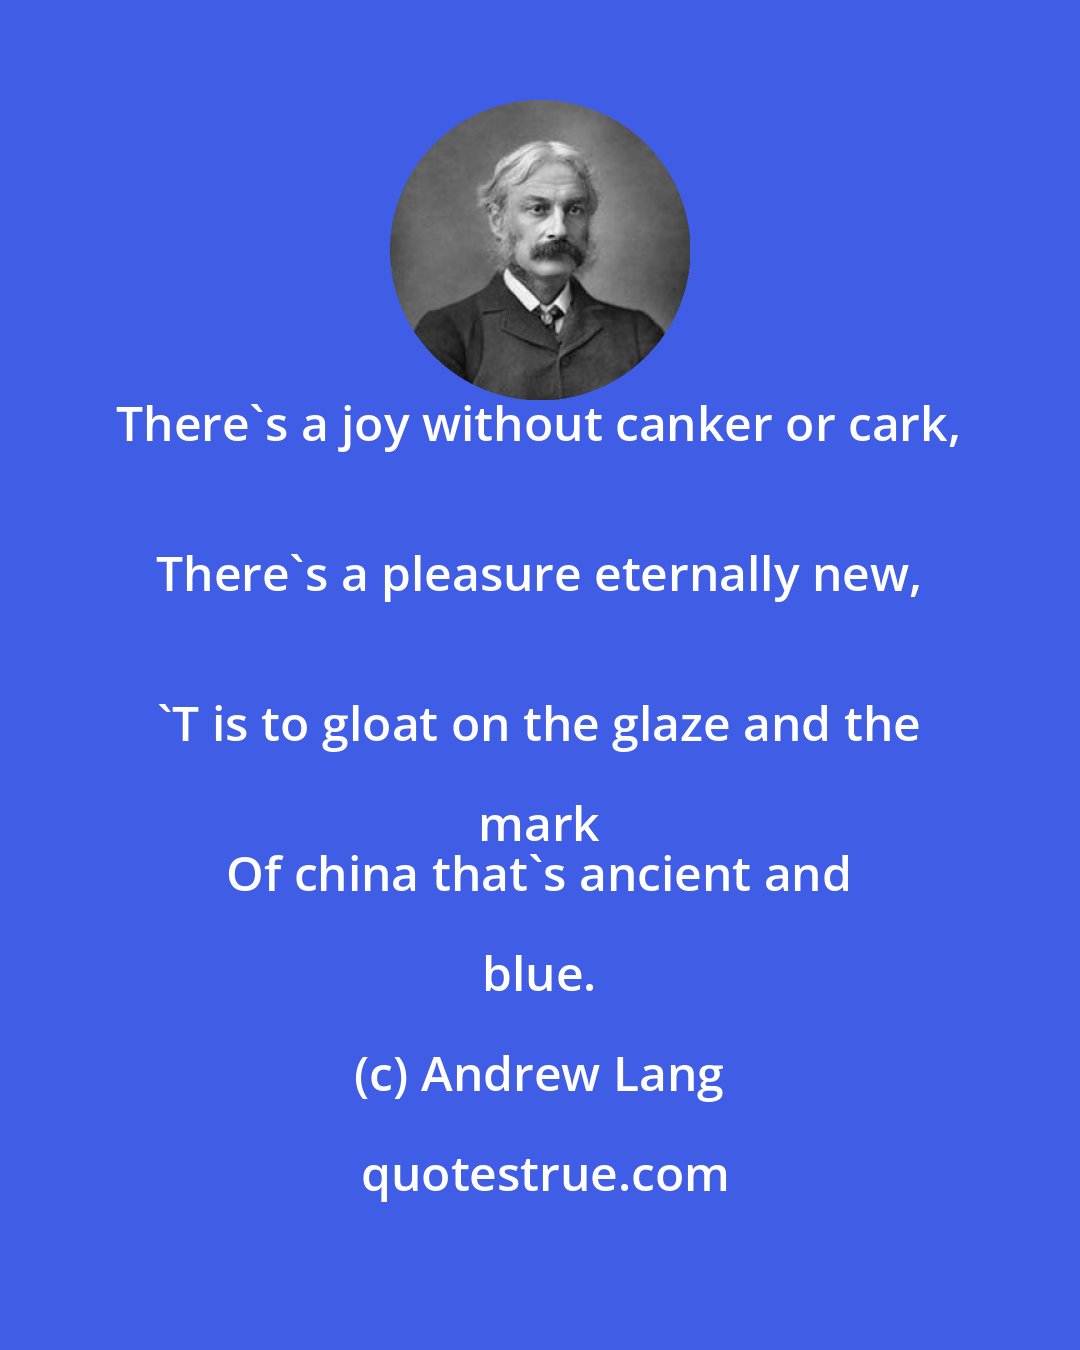 Andrew Lang: There's a joy without canker or cark, 
 There's a pleasure eternally new, 
 'T is to gloat on the glaze and the mark 
 Of china that's ancient and blue.